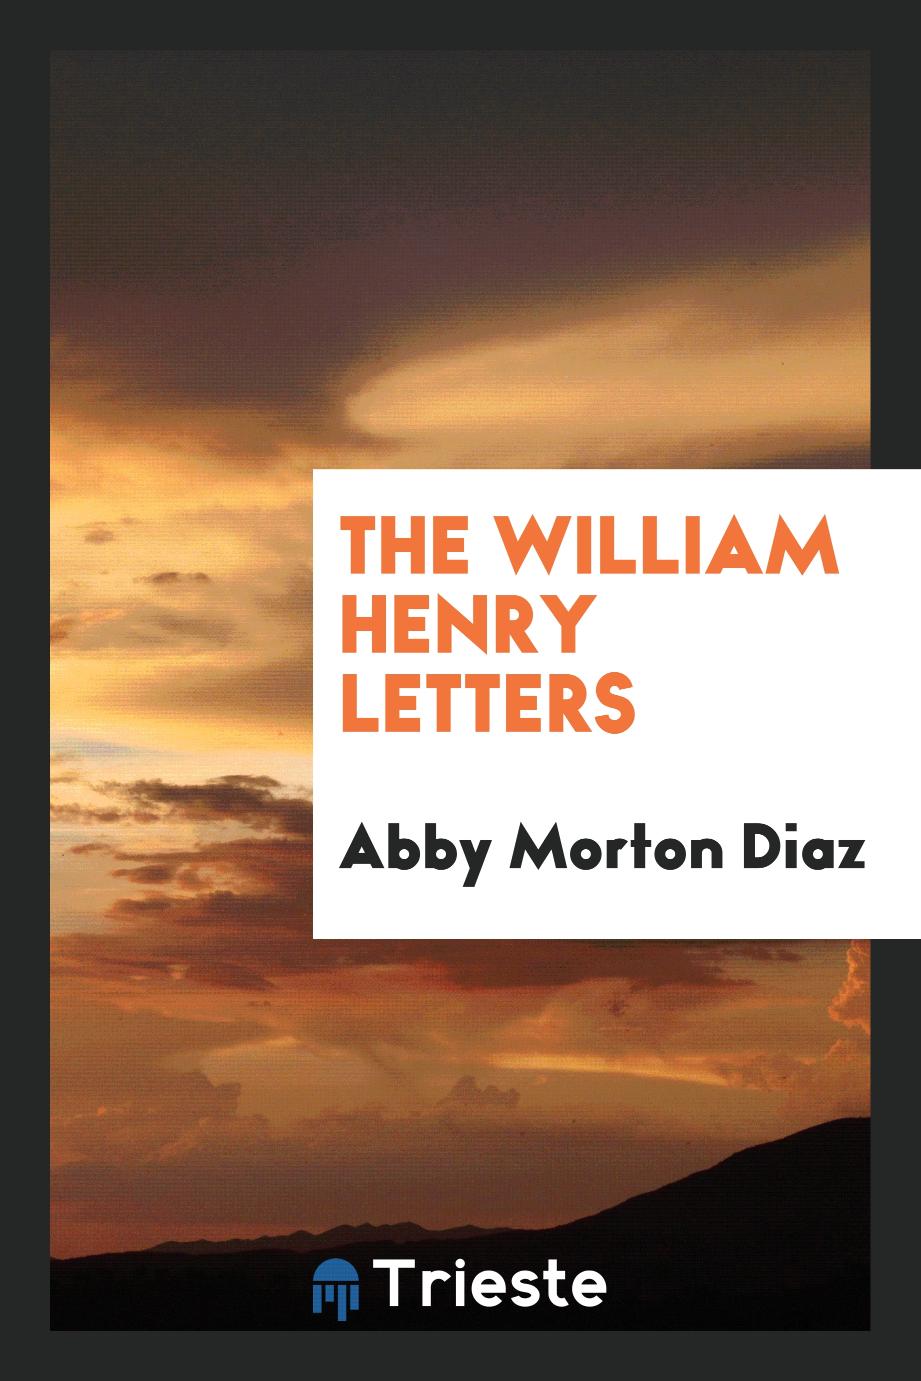 The William Henry letters